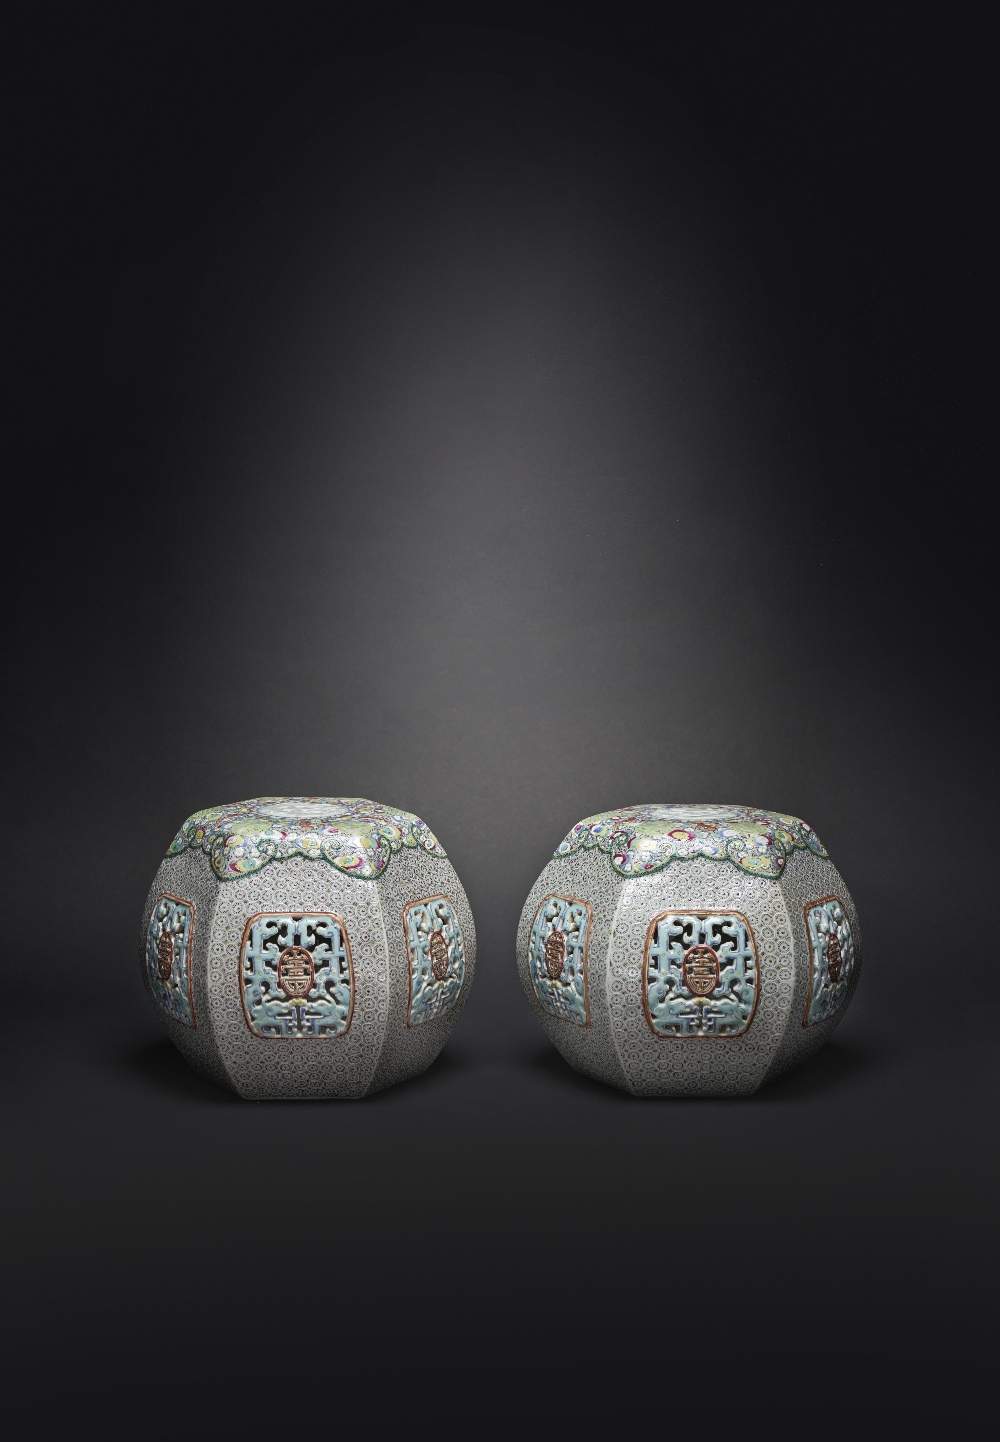 A RARE PAIR OF CHINESE HEXAGONAL ARM RESTS YONGZHENG 1723-35 The sides decorated with reticulated